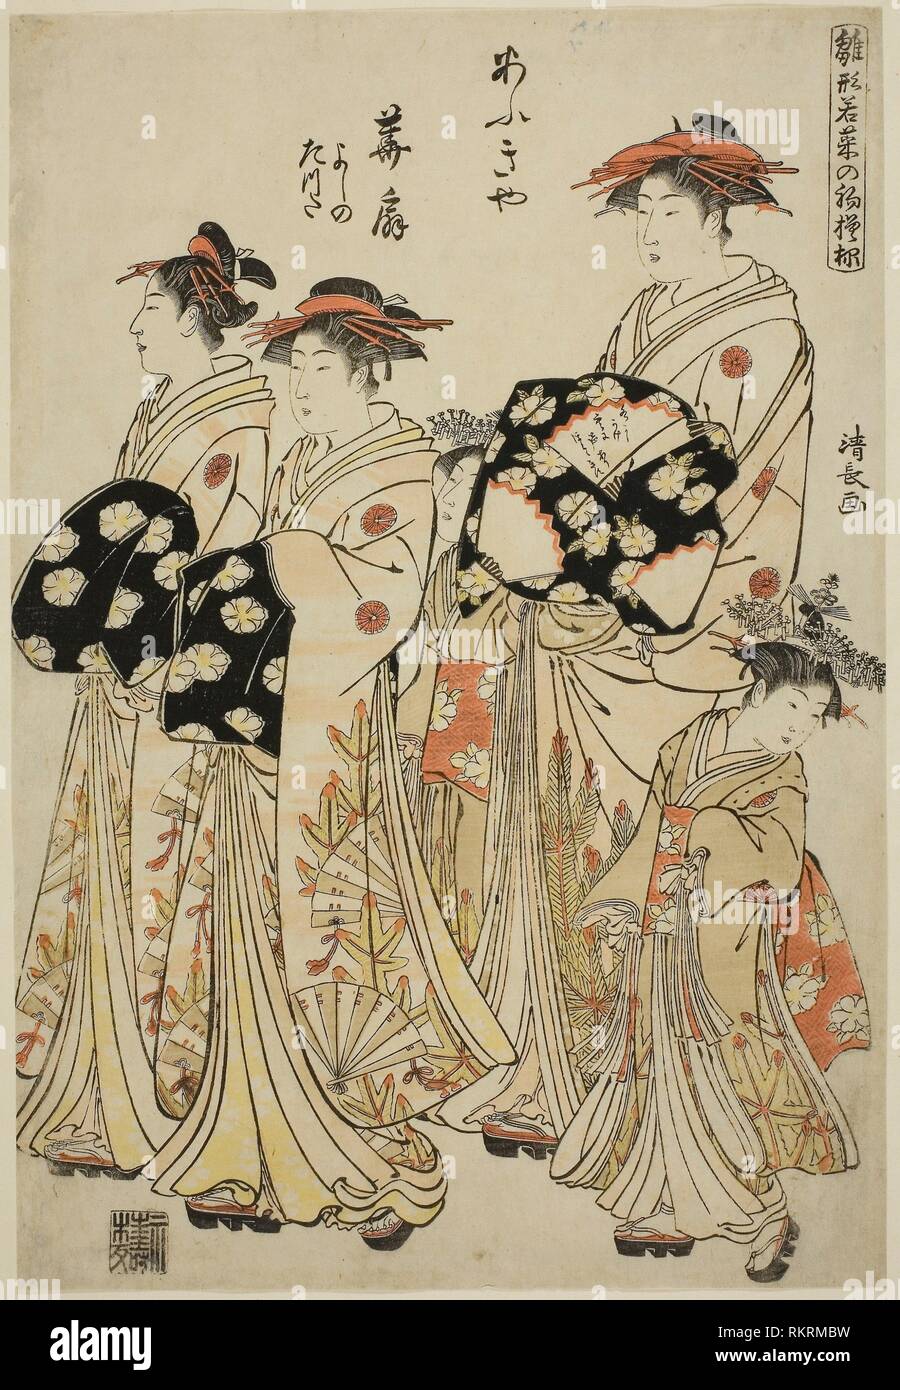 The Courtesan Hanaogi of the Ogiya with Her Attendants Yoshino and Tatsuta, from the series ''Models for Fashion: New Designs as Fresh as Young Stock Photo